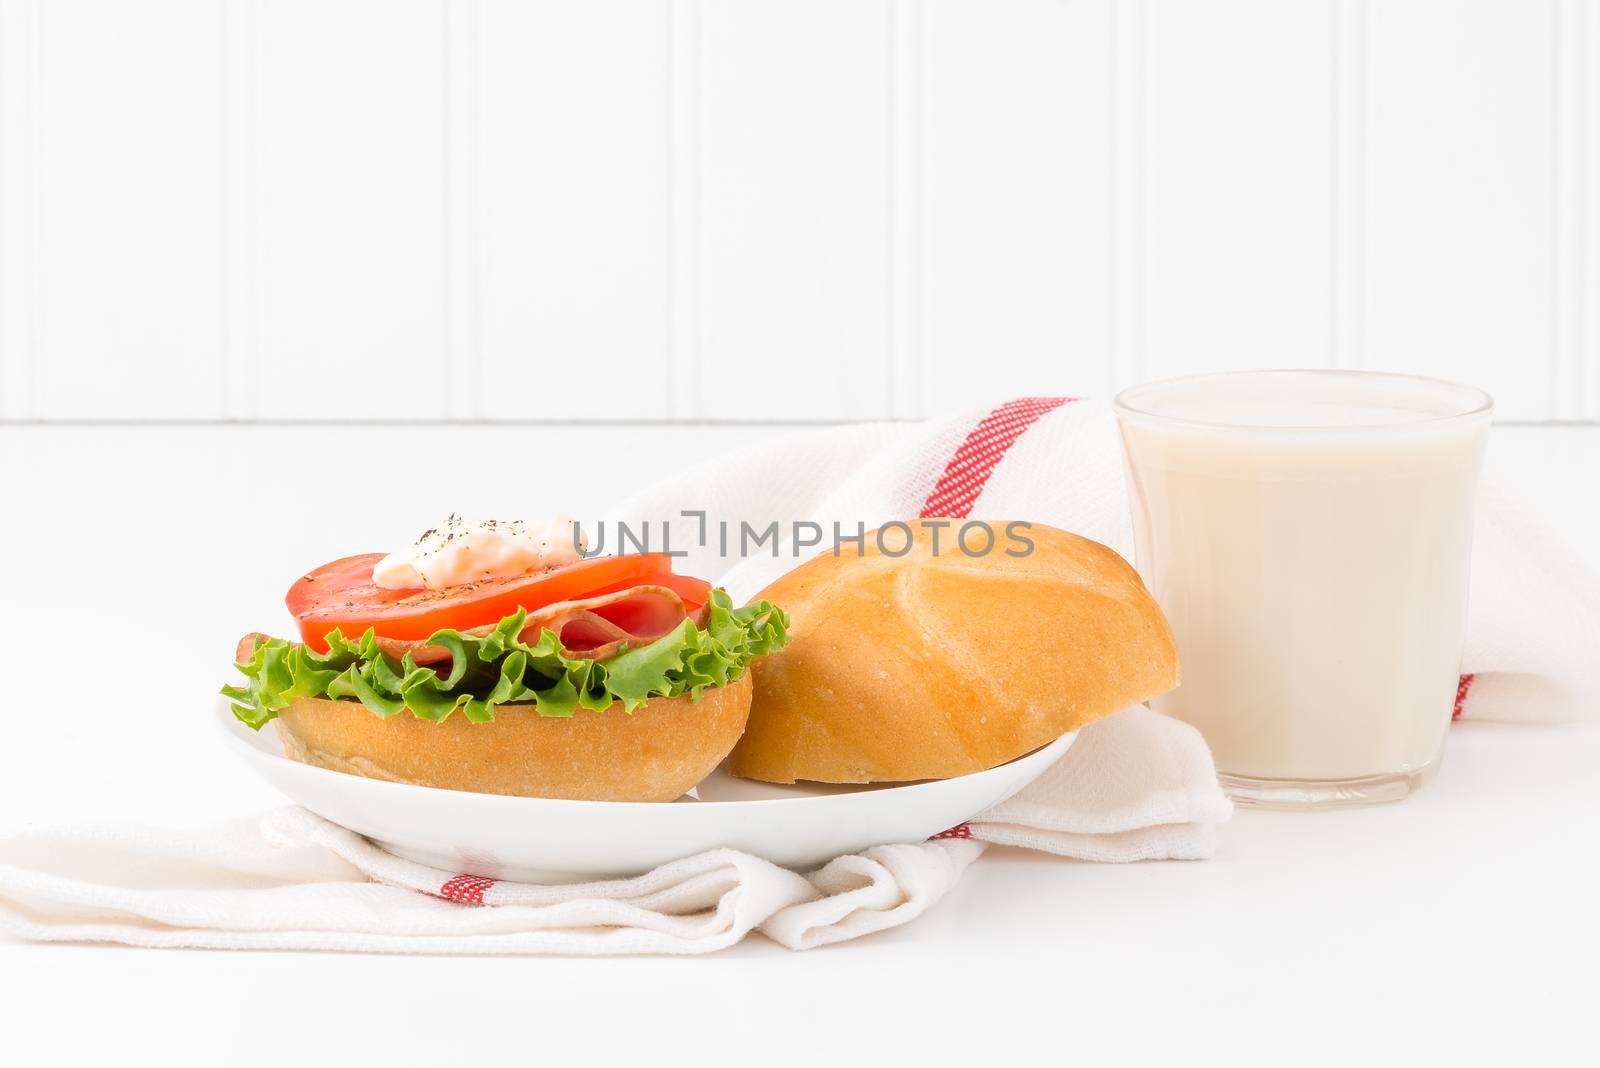 Tomato and ham sandwich on a fresh kaiser bun served with a glass of cold milk.